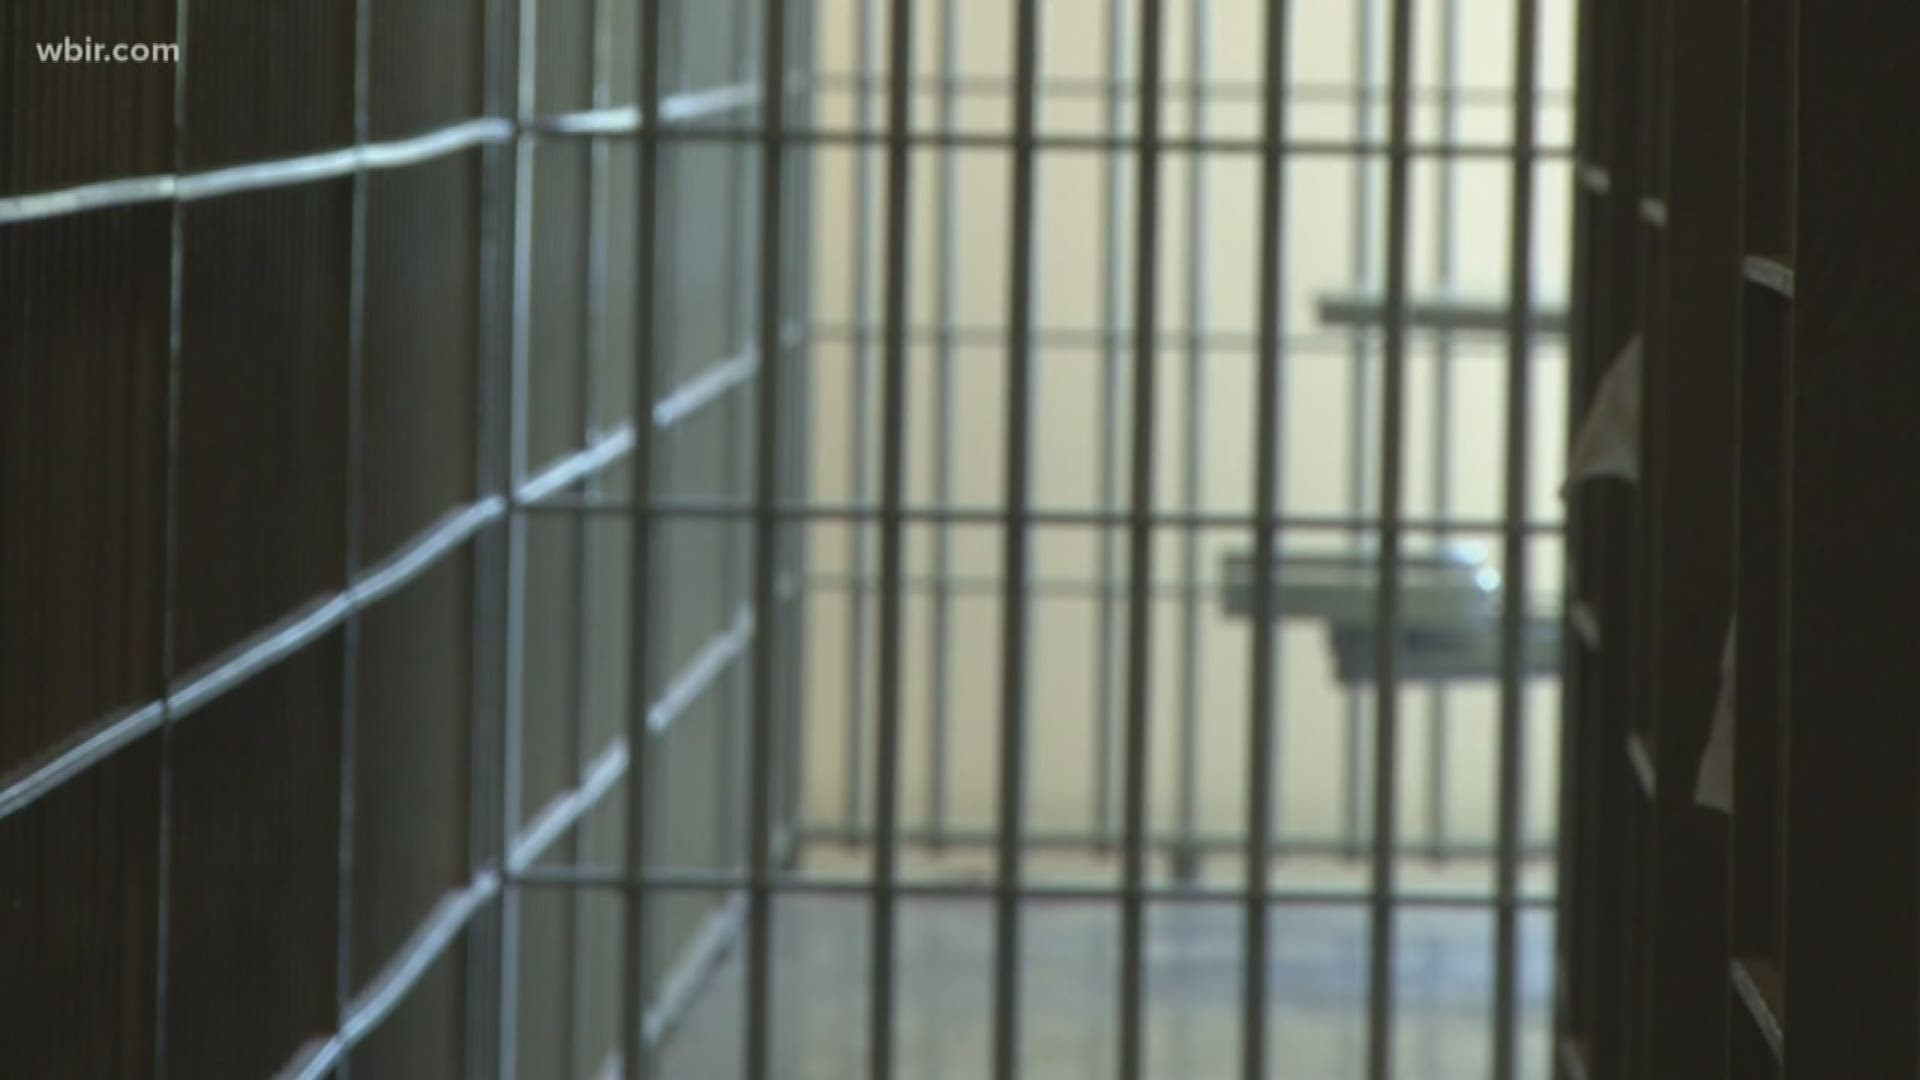 Knox County Sheriff Tom Spangler is raising concerns about jail overcrowding.